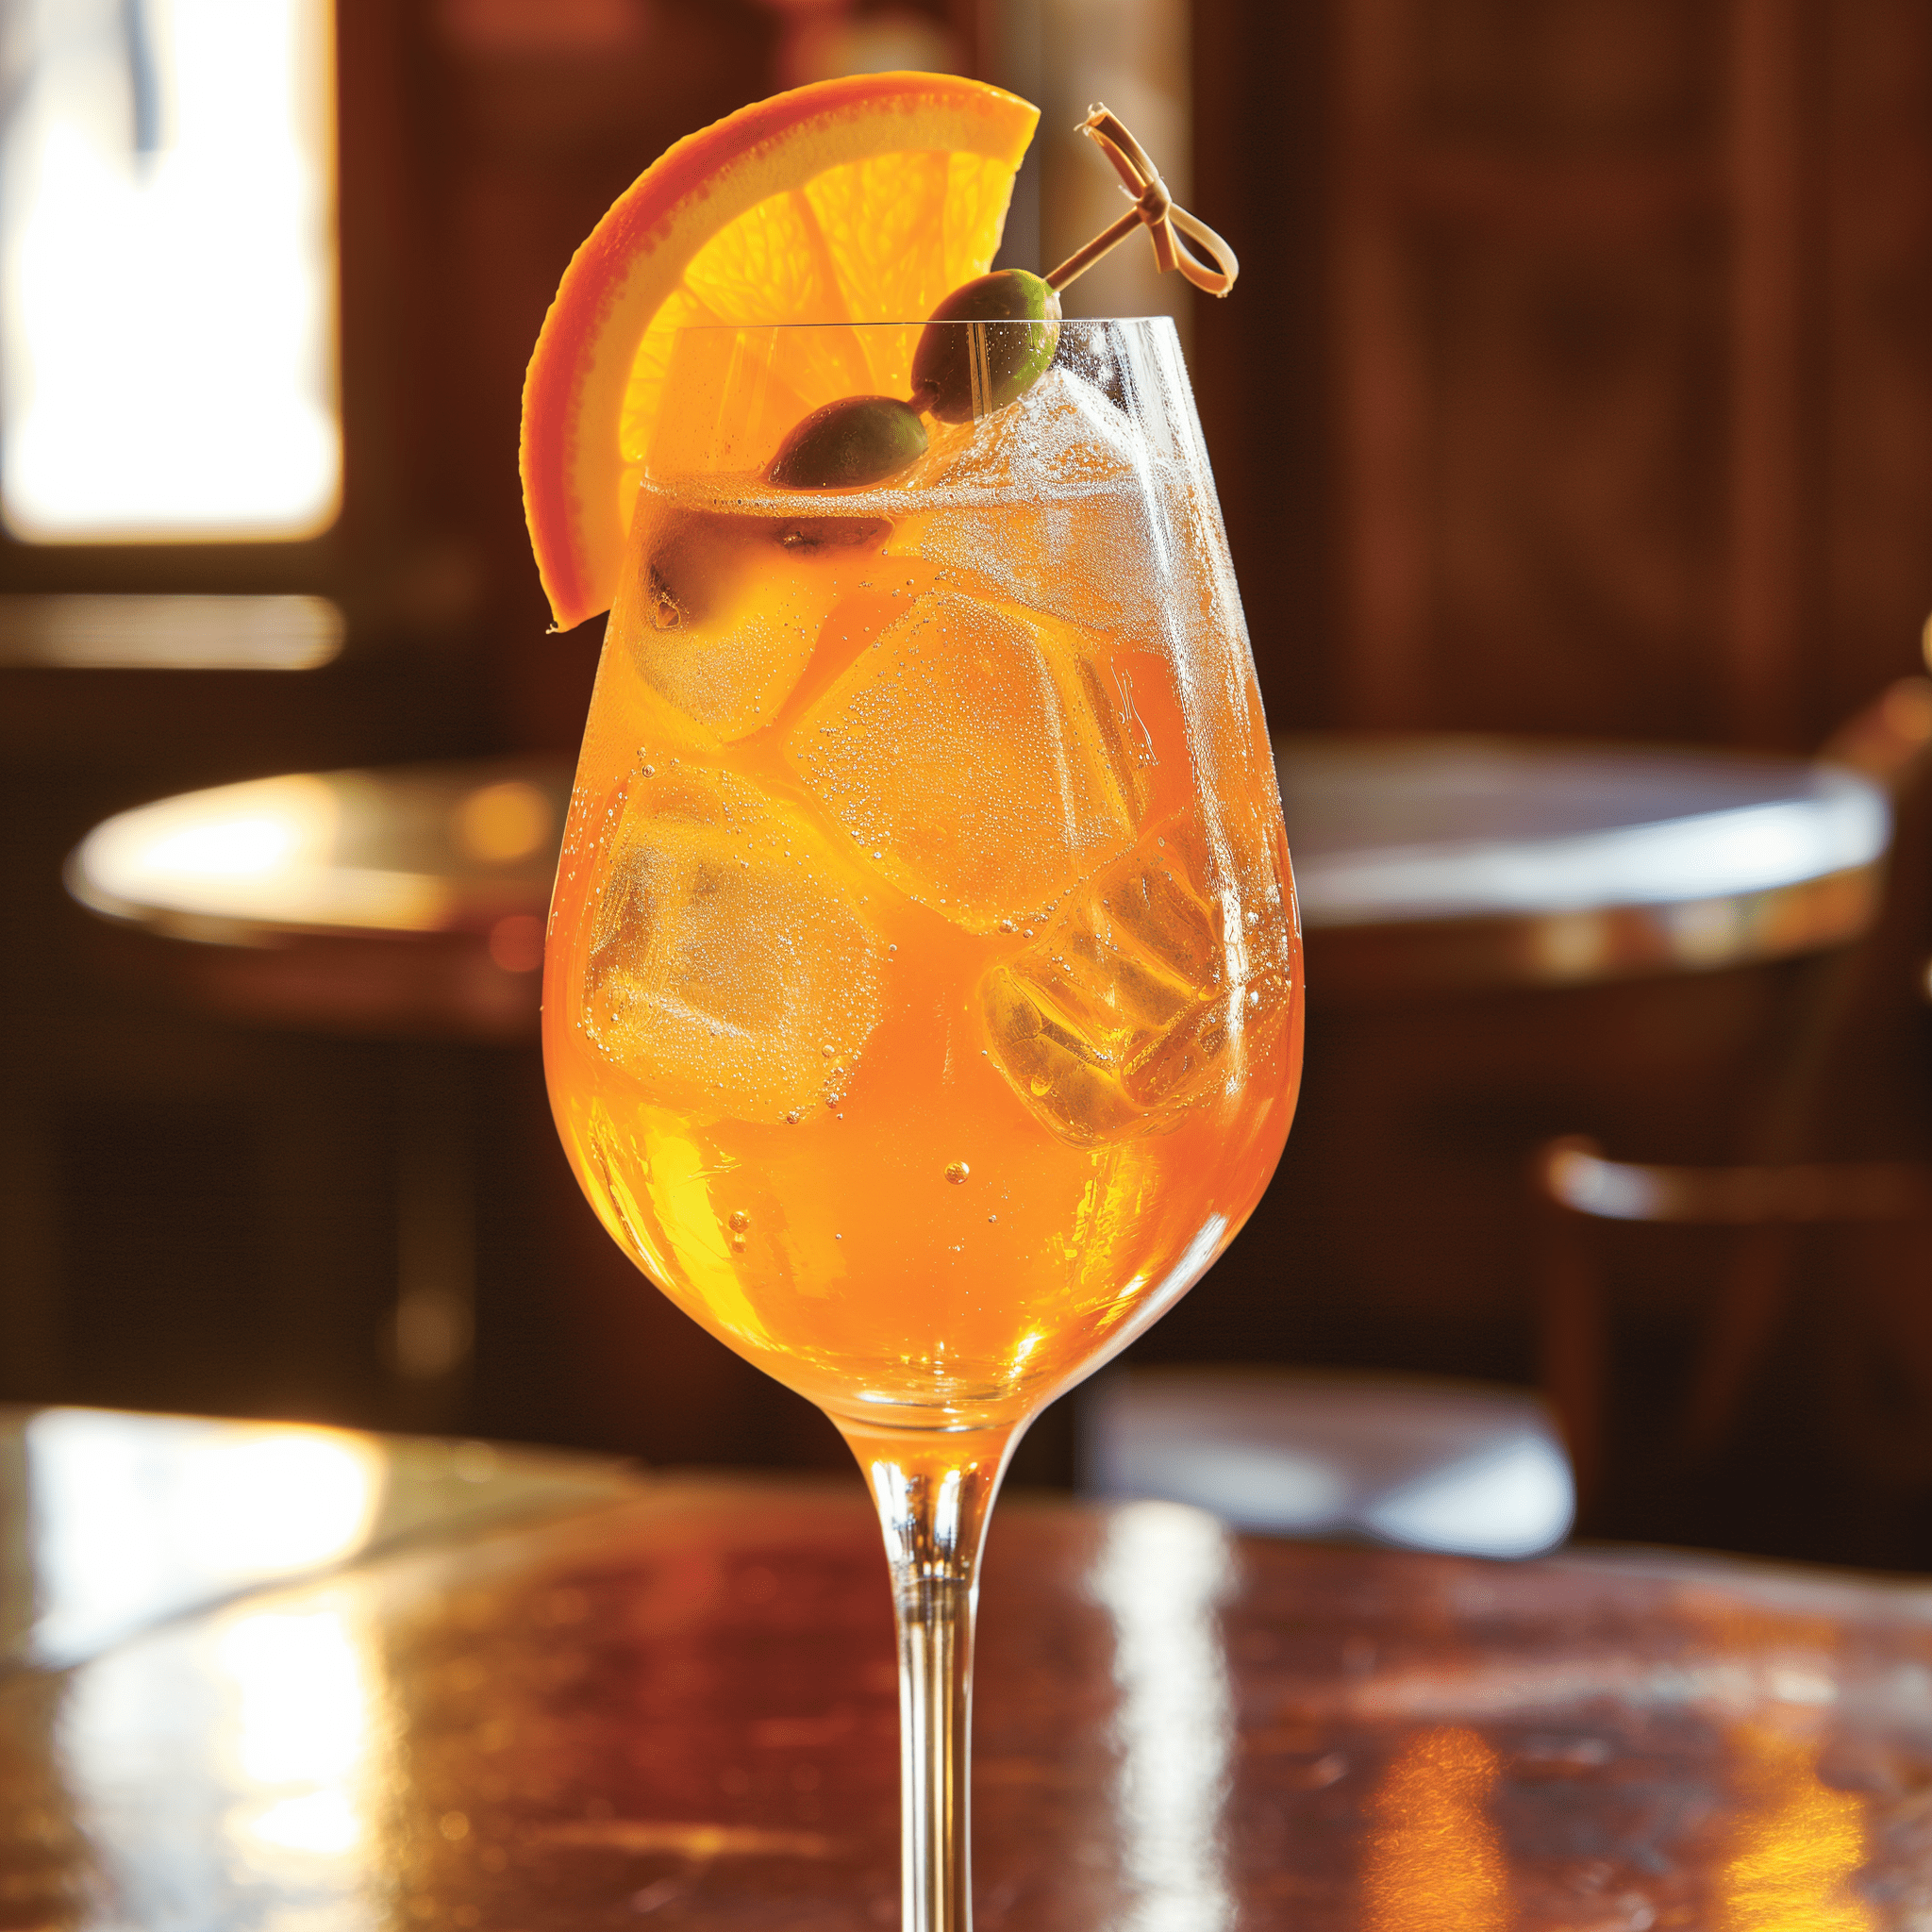 Spritz Mocktail Recipe - The Spritz Mocktail has a refreshing and zesty taste, with a balance of sweet and bitter notes. It's light and effervescent, making it an ideal drink for sipping on a warm afternoon or as a pre-dinner aperitif.